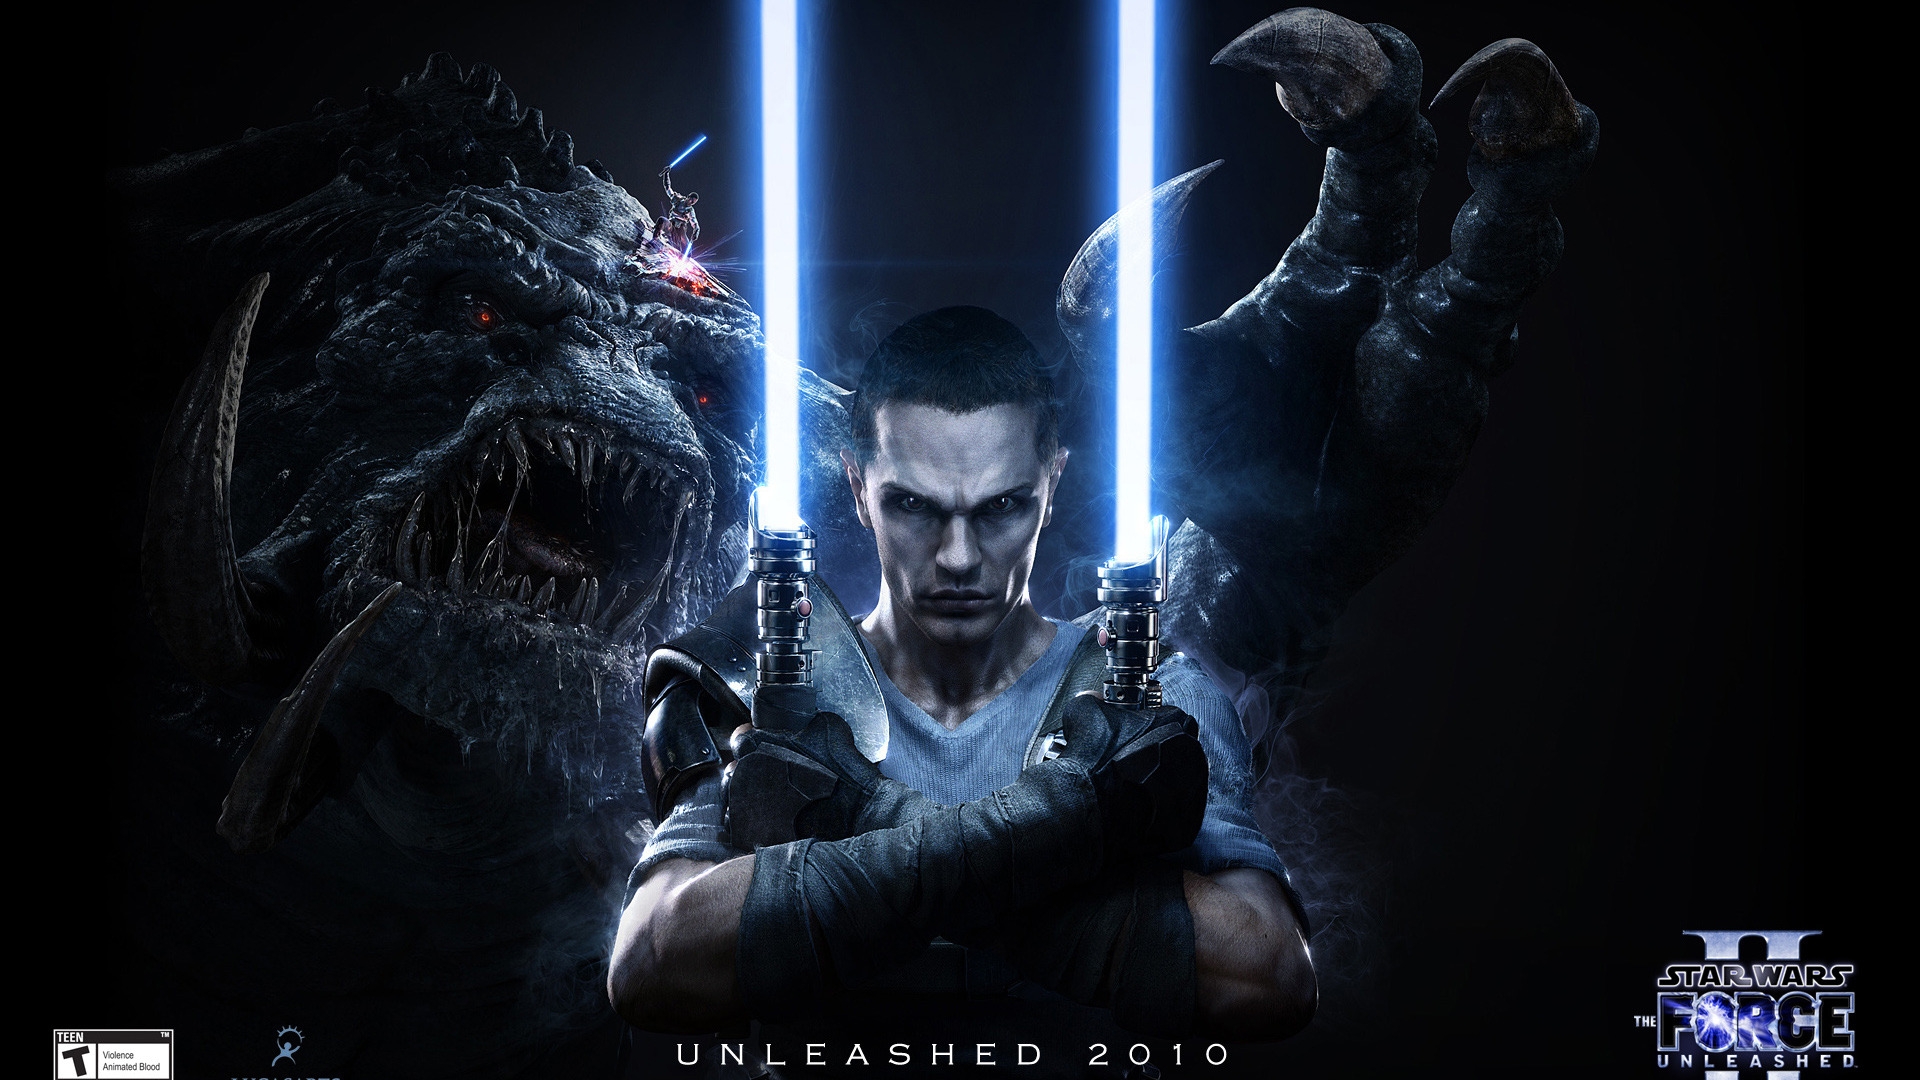 Star Wars The force Unleashed 2 for 1920 x 1080 HDTV 1080p resolution